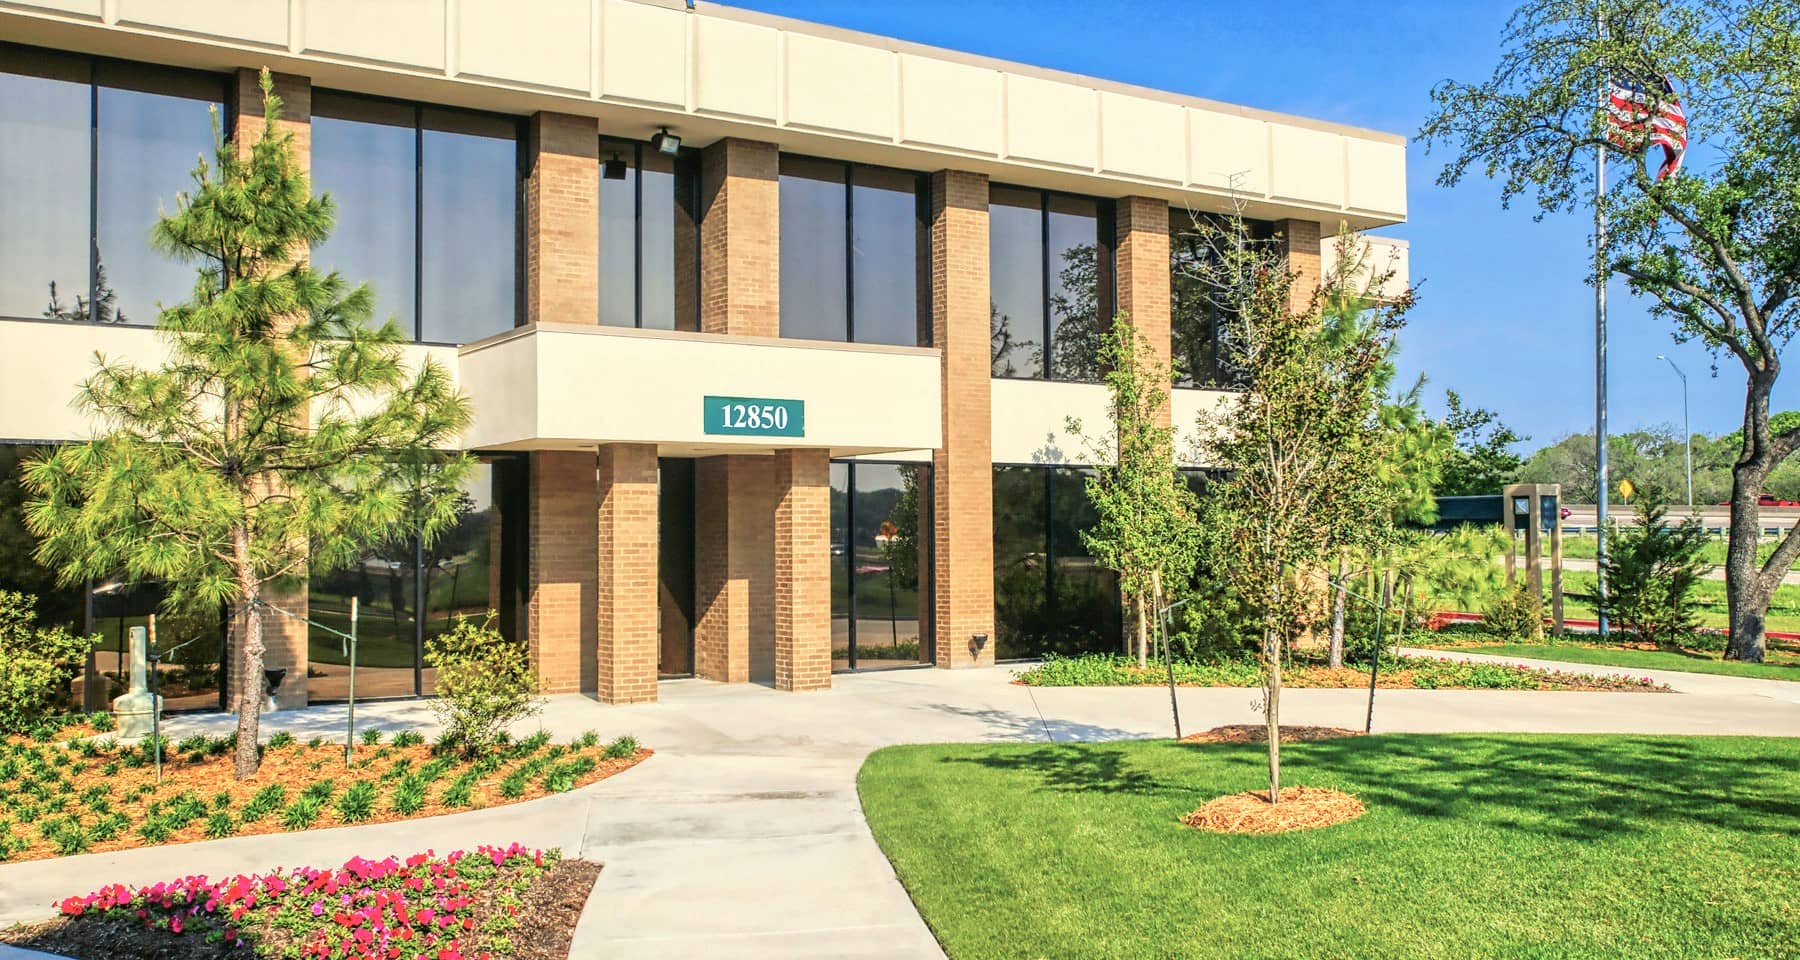 Commercial Plaza Hillcrest Executive Suites & Medical Offices Dallas